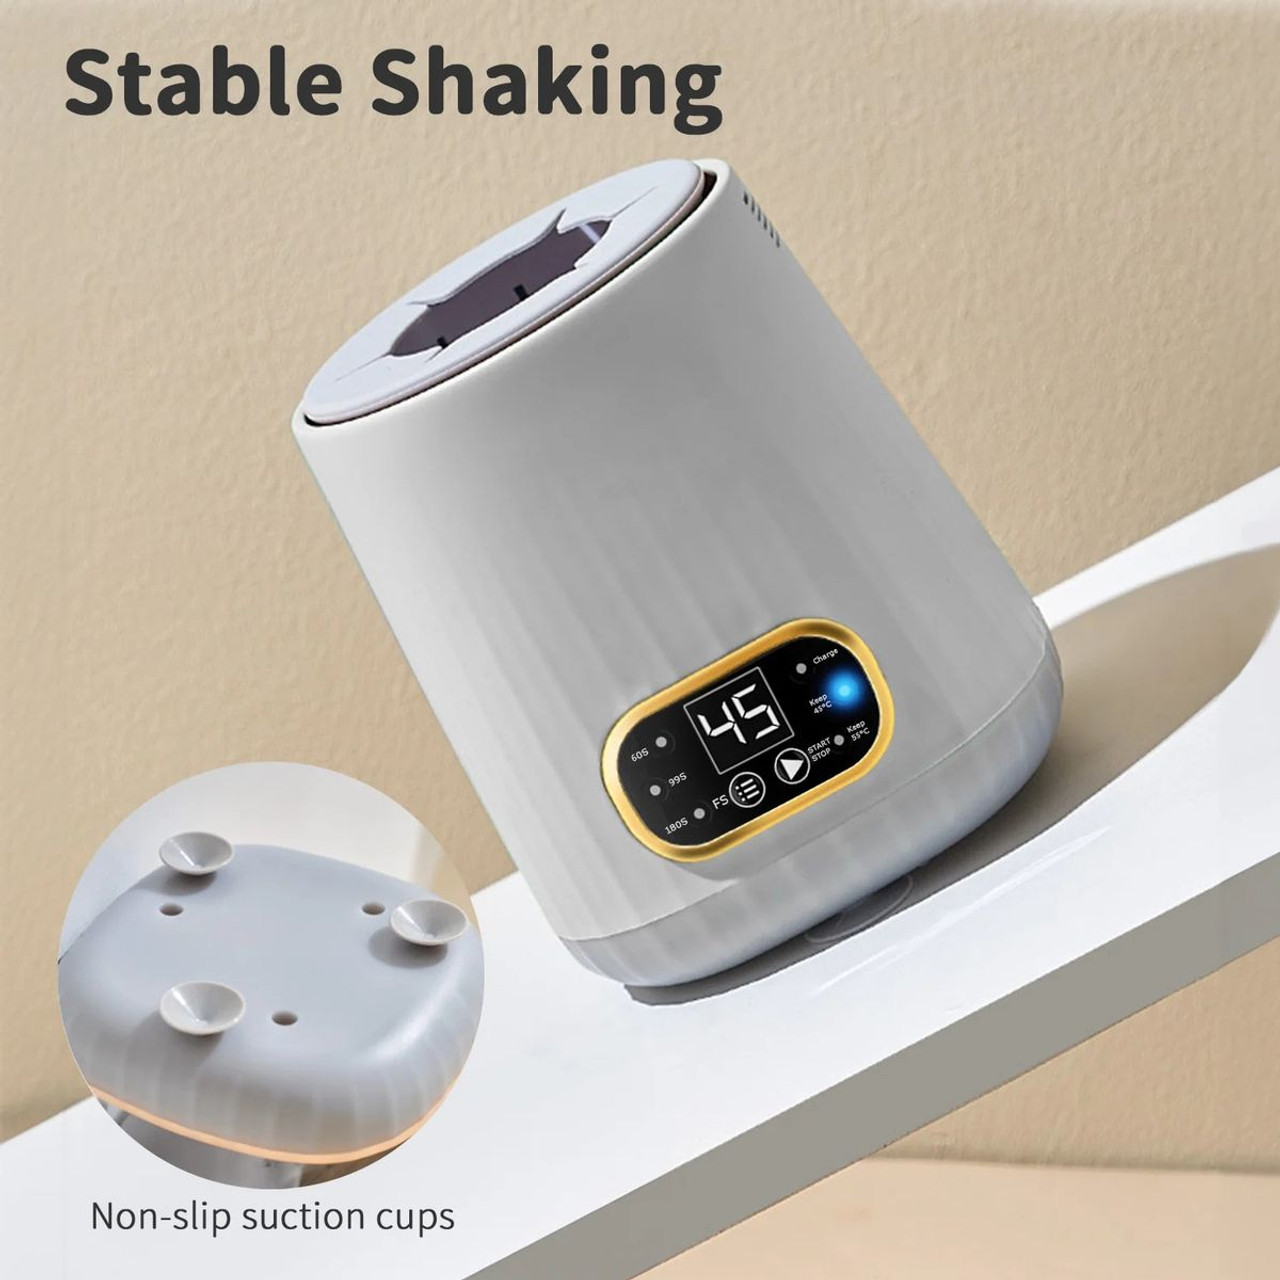 Intelligent Electric Breastmilk Shaker, Constant Temperature Thawing And Heat Preservation Three-in-one Breastmilk Shaker Color White product image